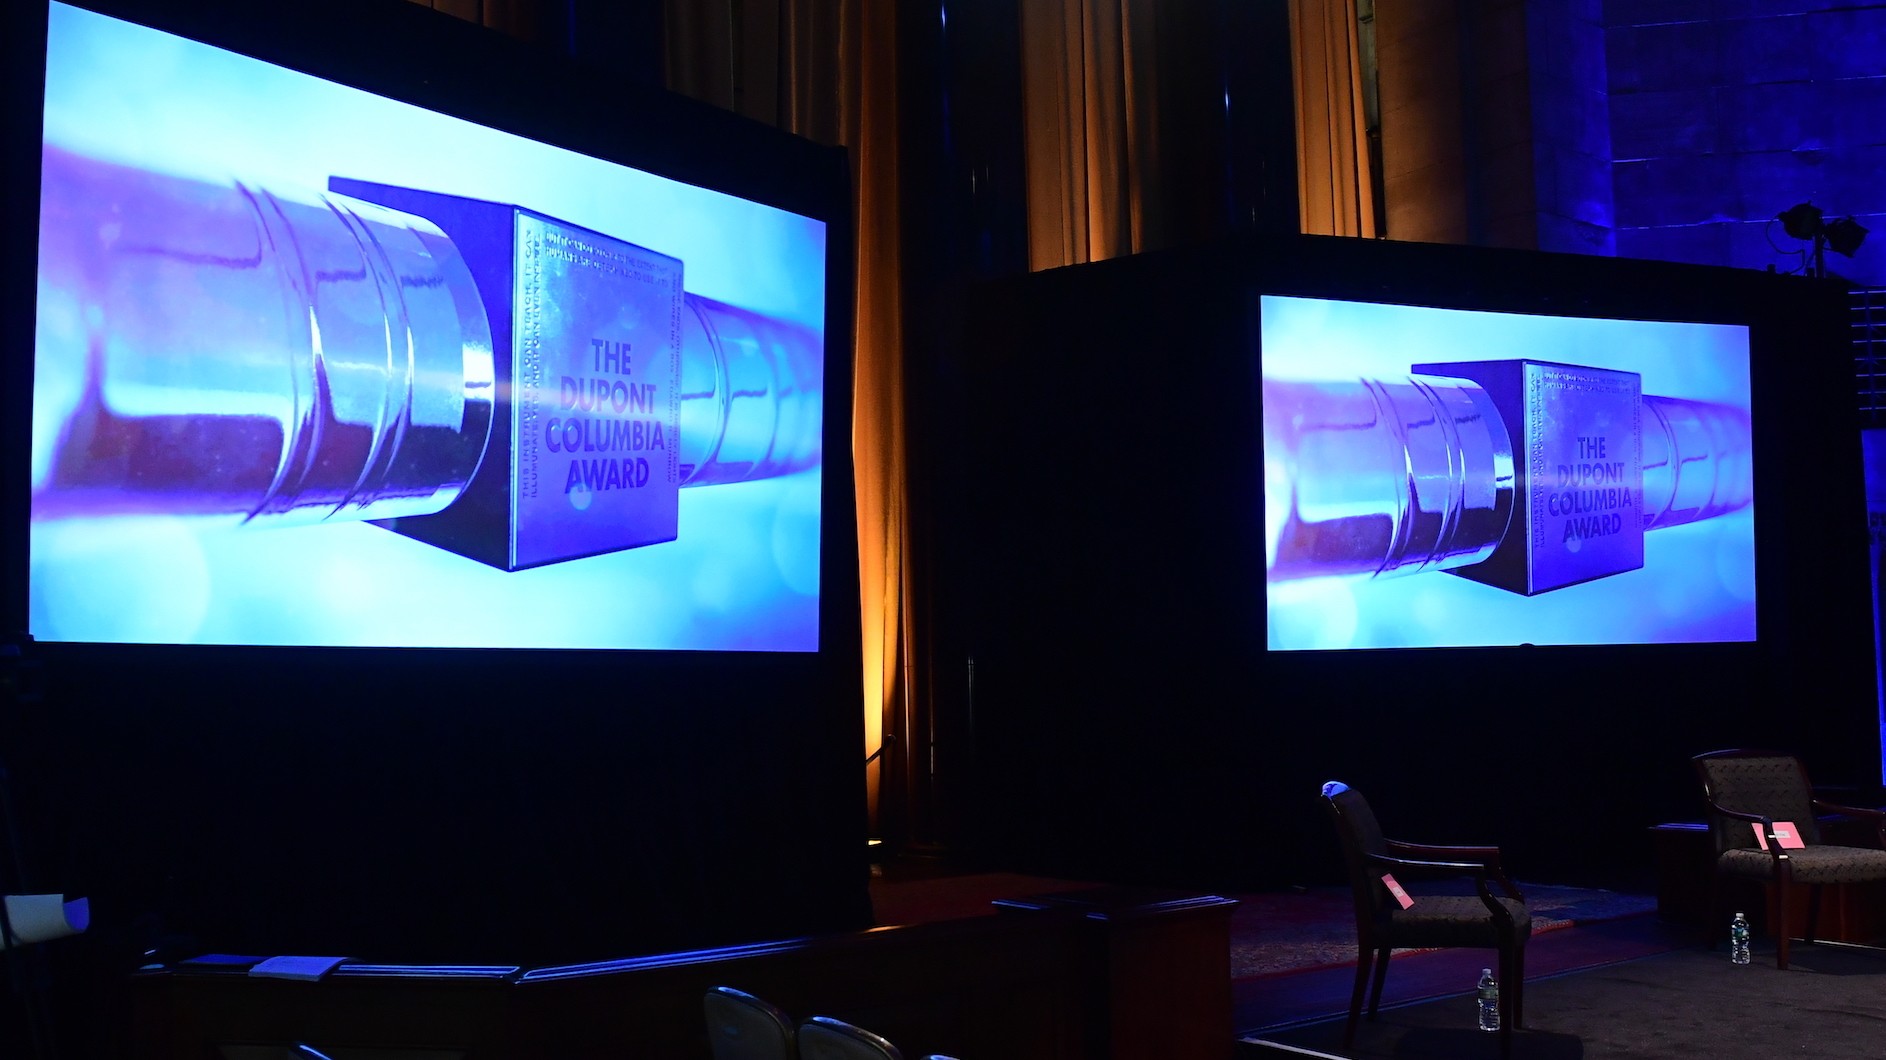 Two big screens with identical images of a silver baton with duPont Columbia Award written on them